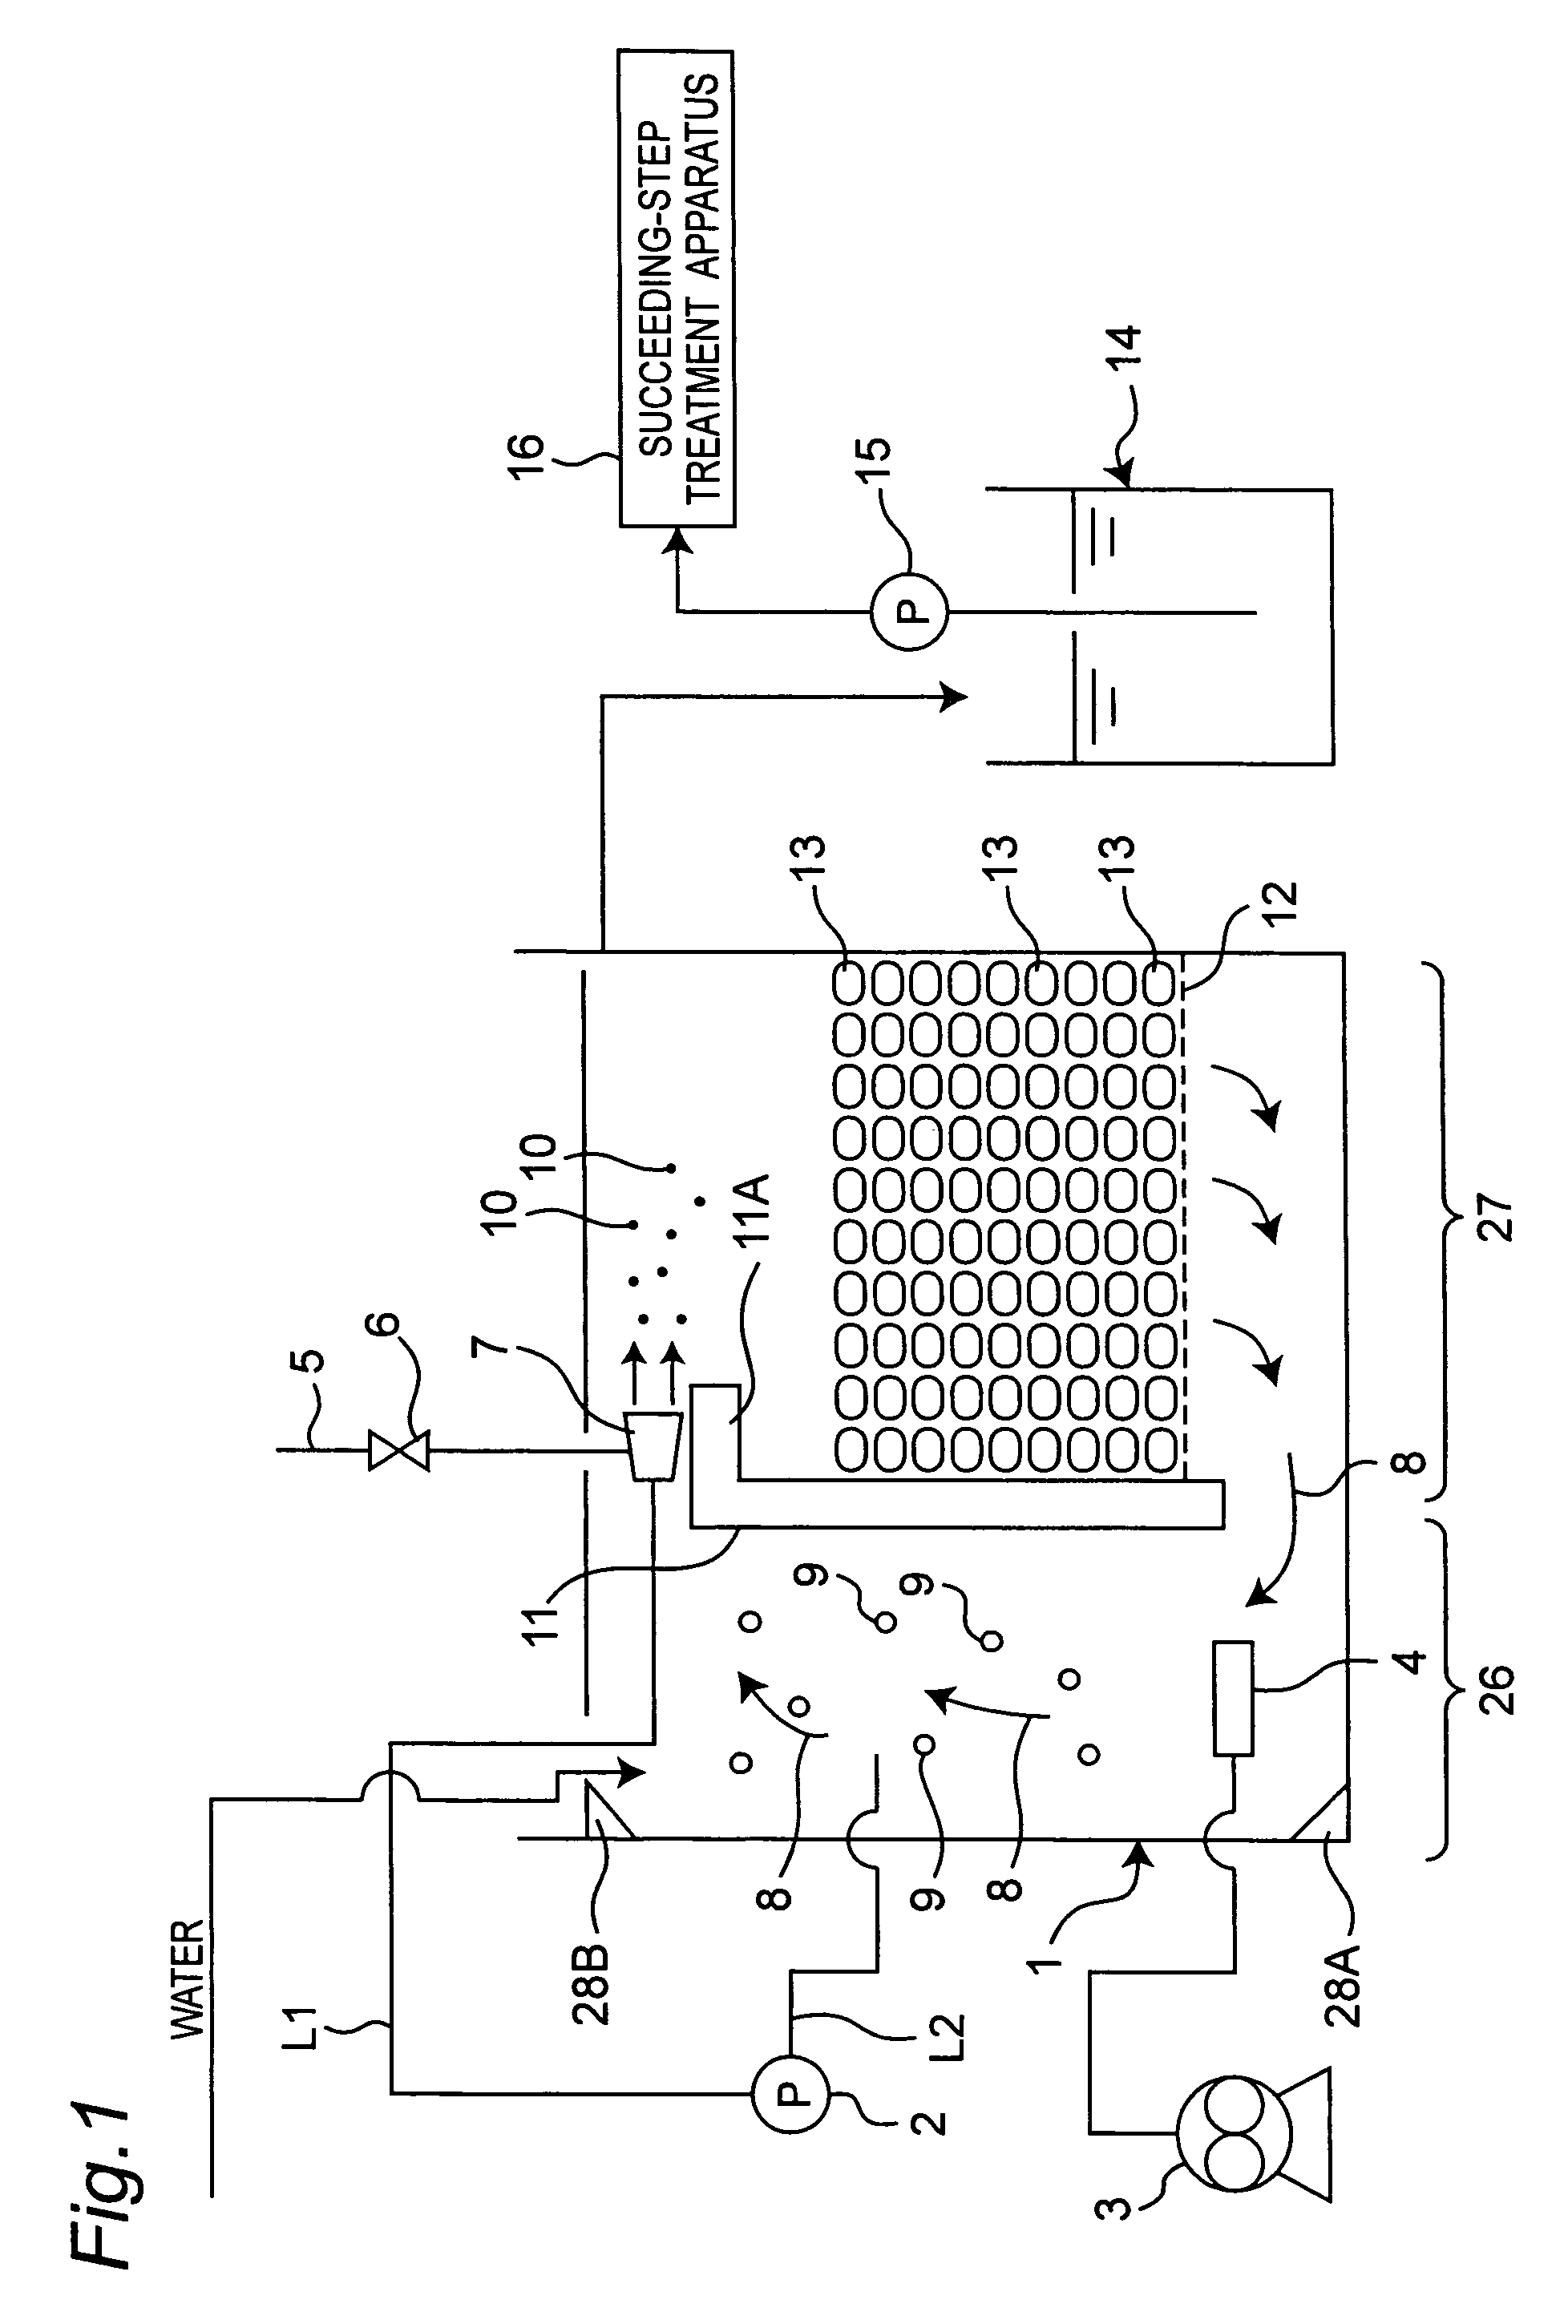 Water treatment method and water treatment apparatus